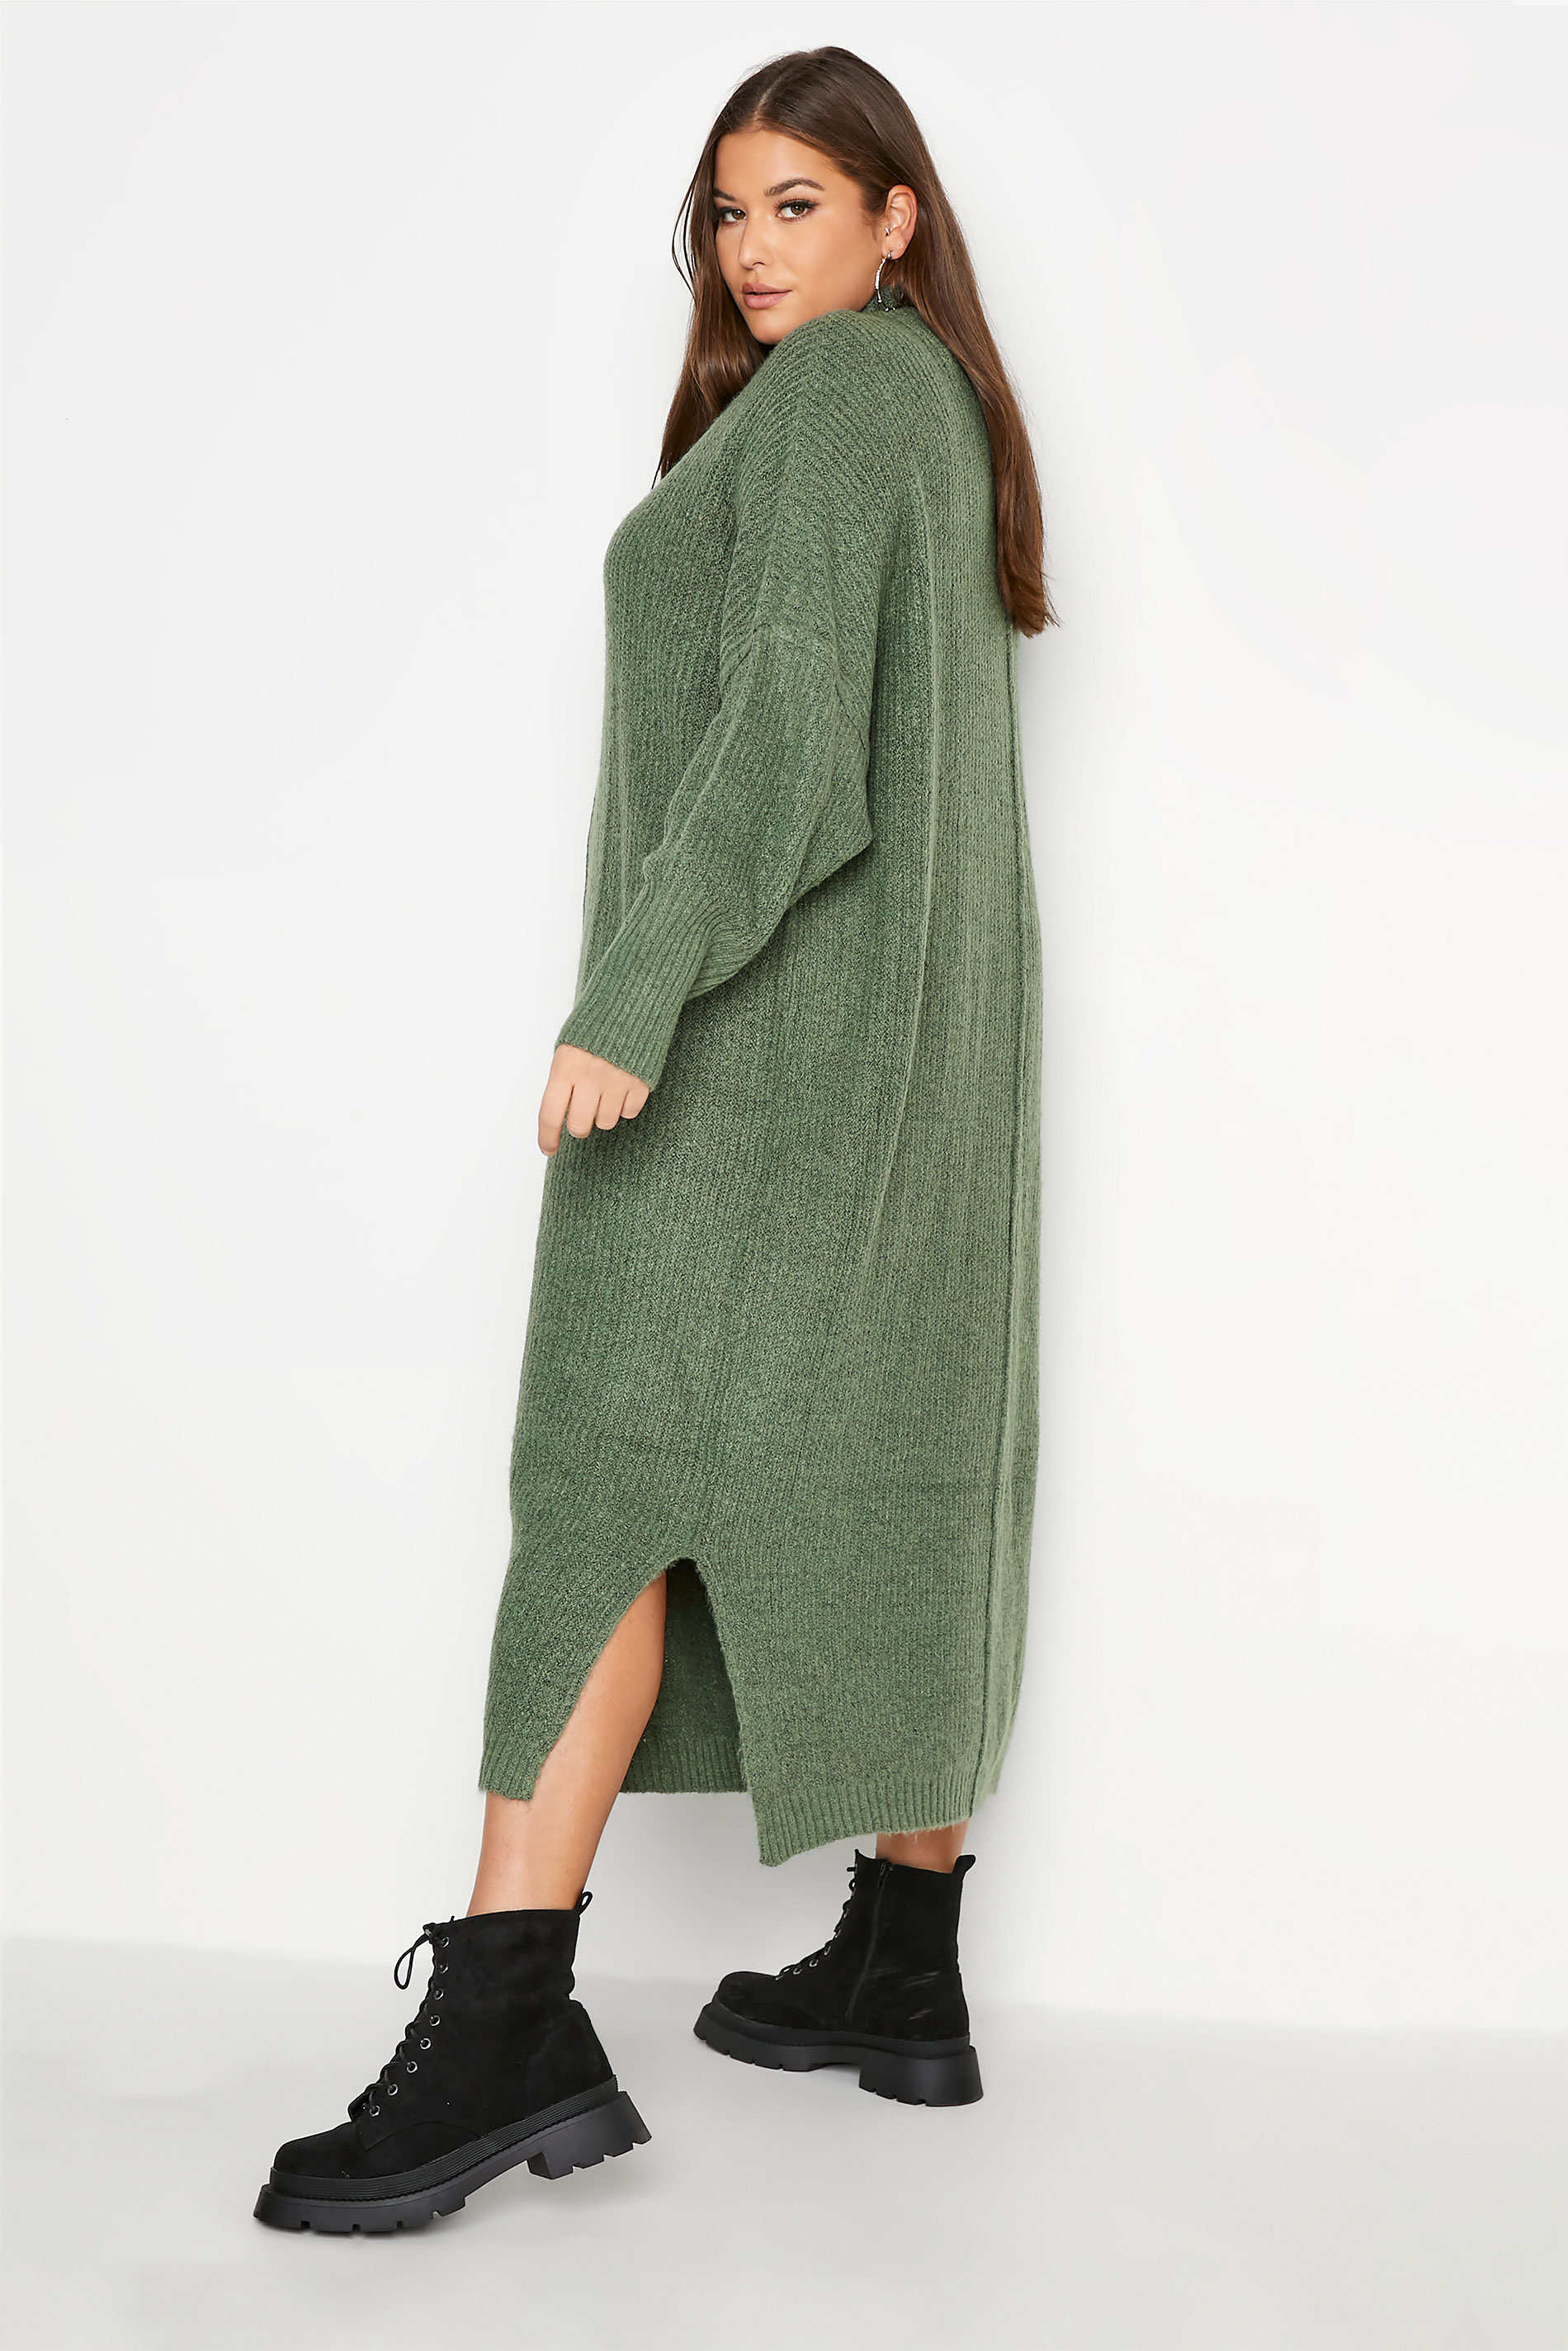 Plus Size Sage Green Knitted Jumper Dress | Yours Clothing 3